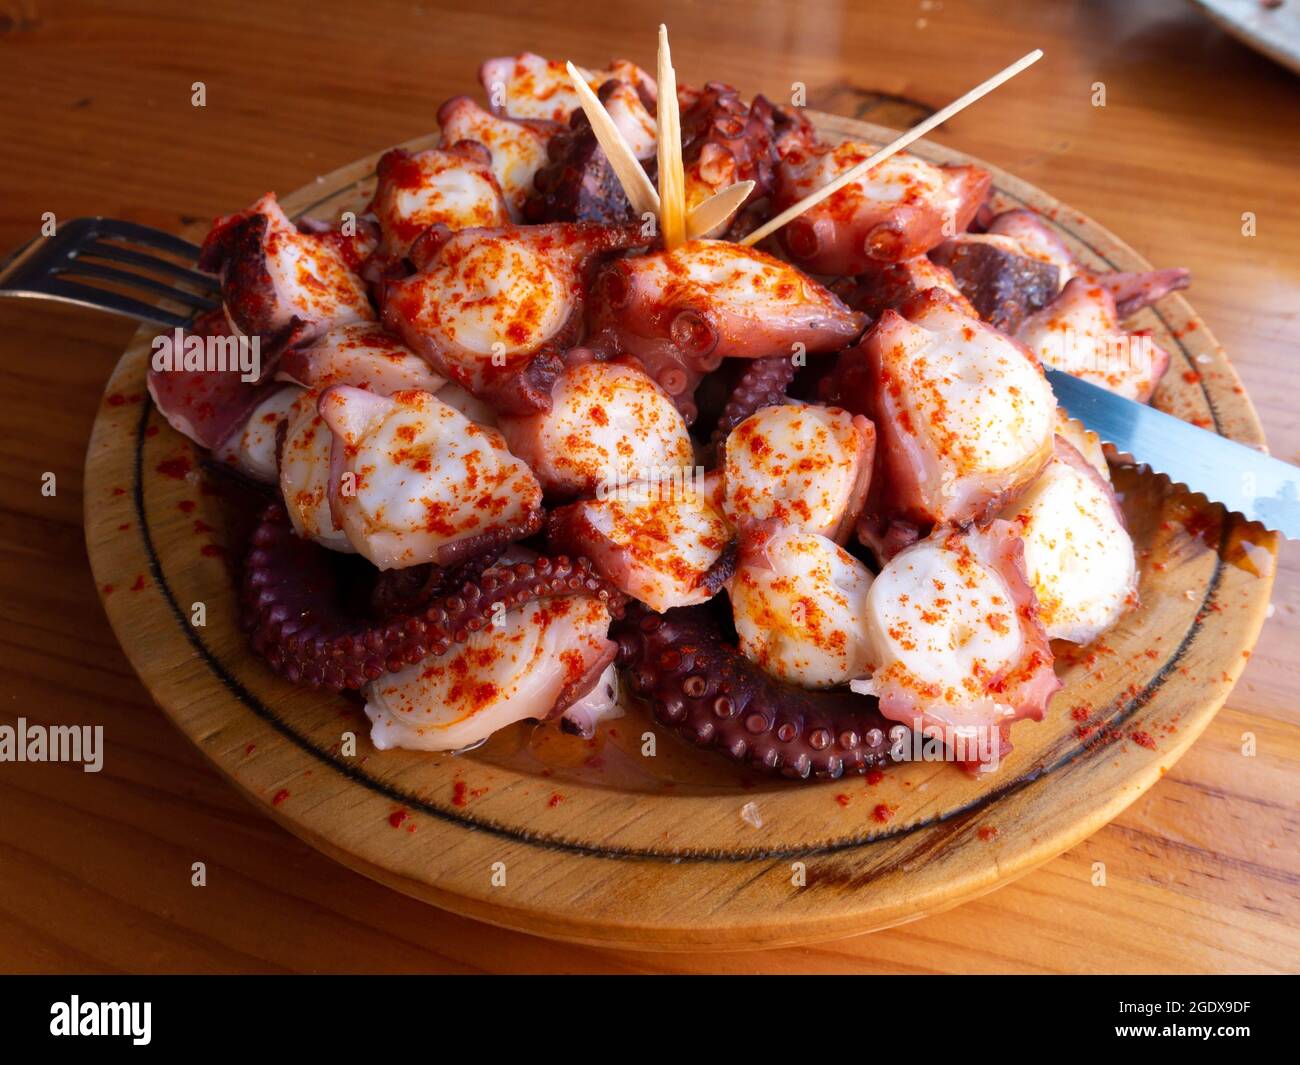 Polbo a feira meaning fair-style octopus in gallego or pulpo a la gallega in Spanish meaning Galician-style octopus a traditional Galician dish Stock Photo